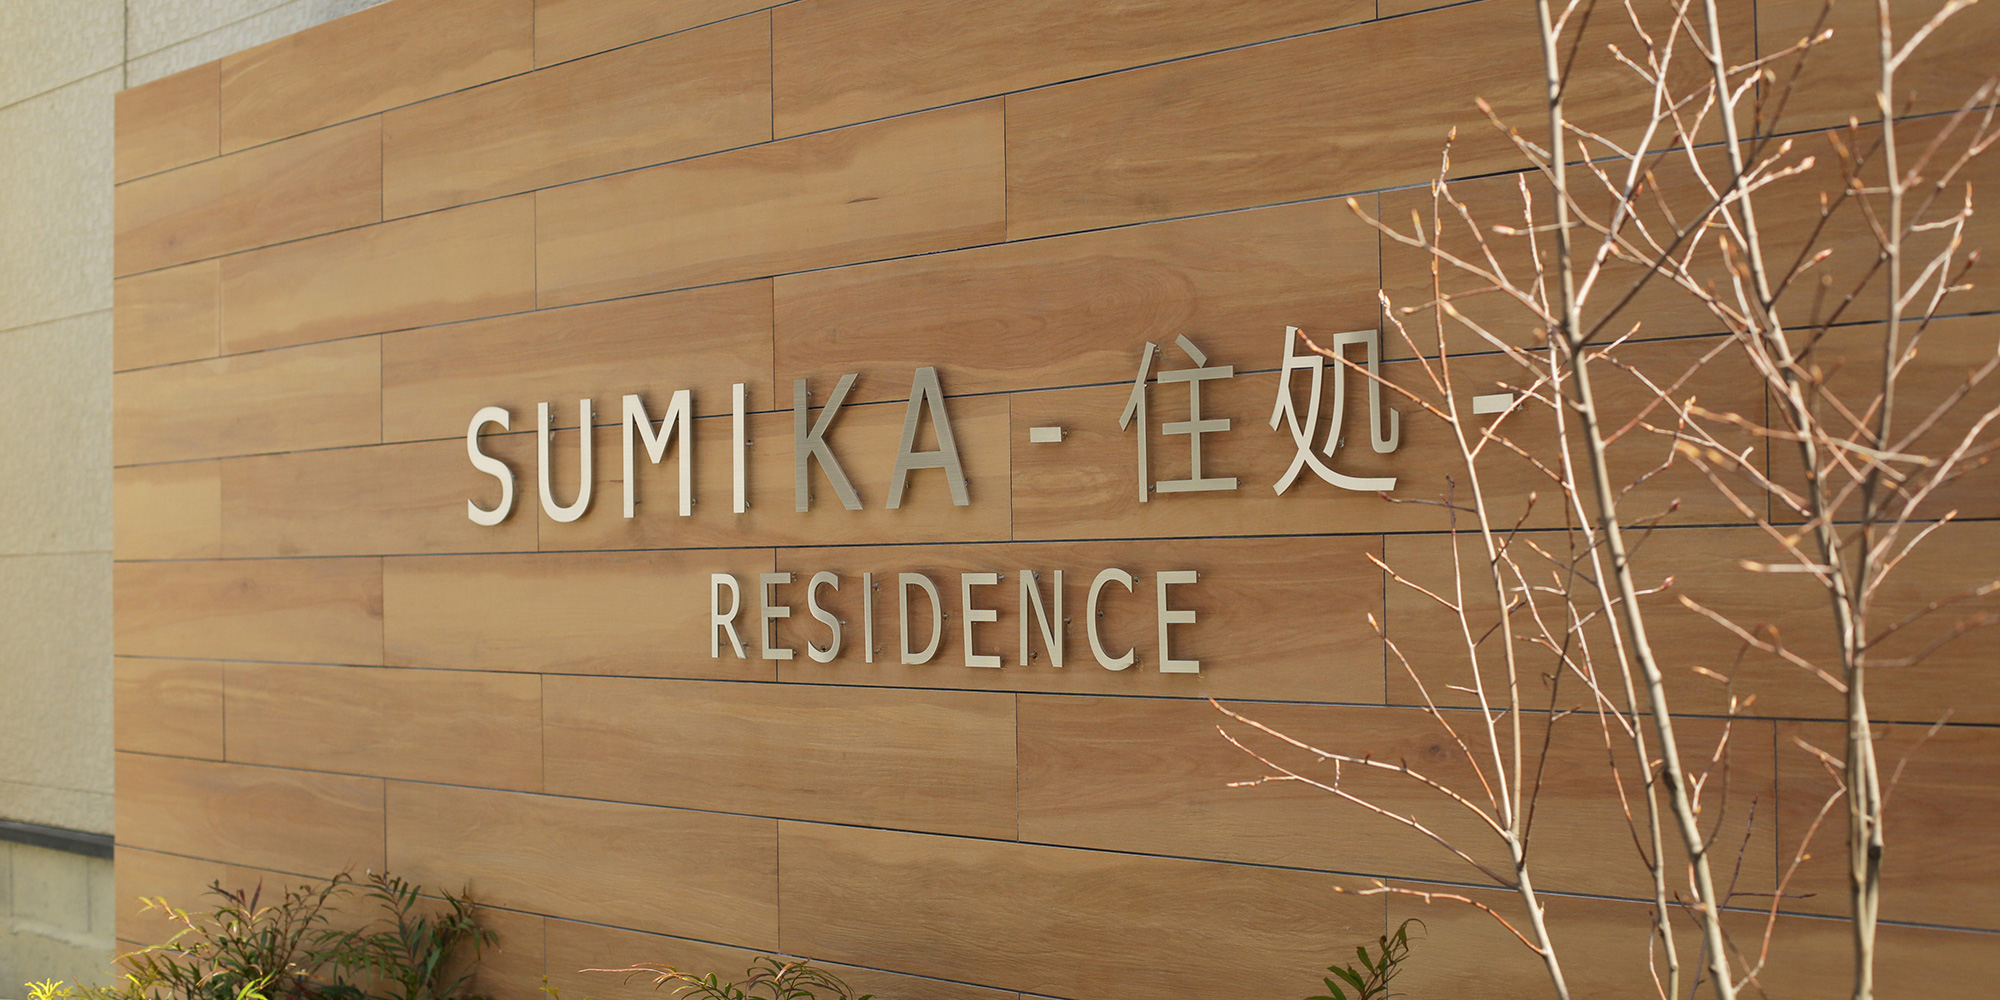 SUMIKA-住処- residence sign